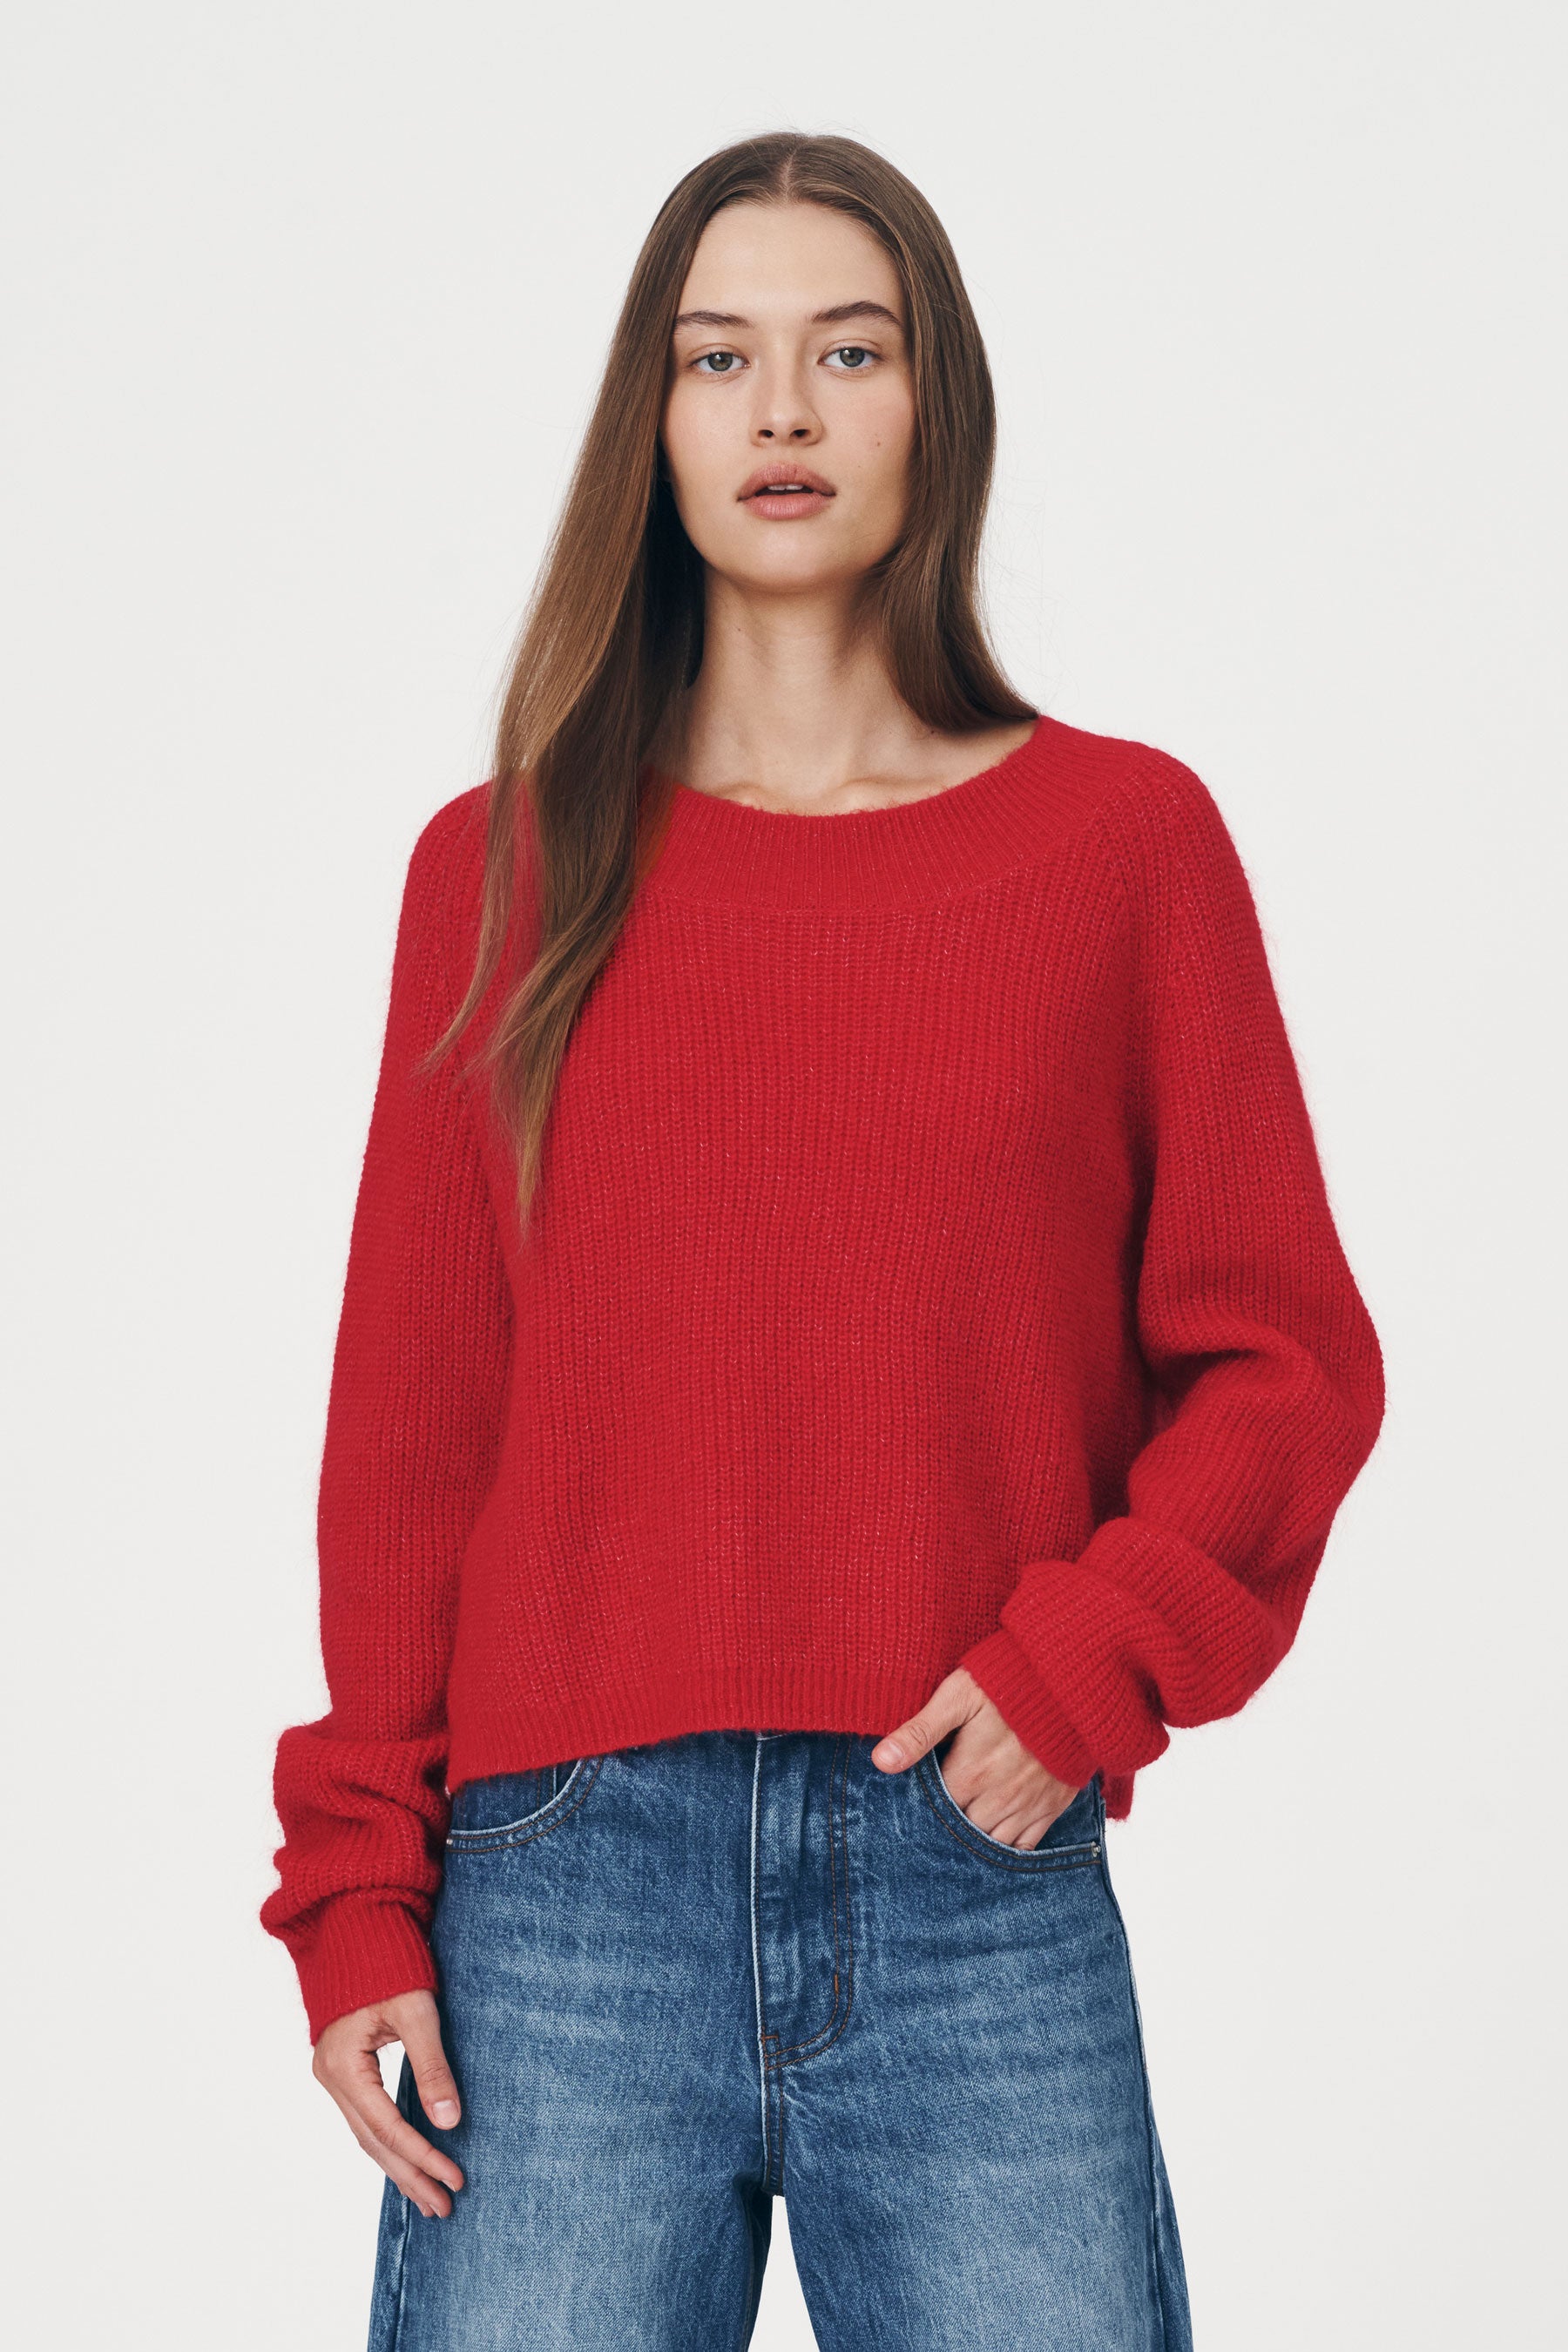 Ester Knit // Cherry Red